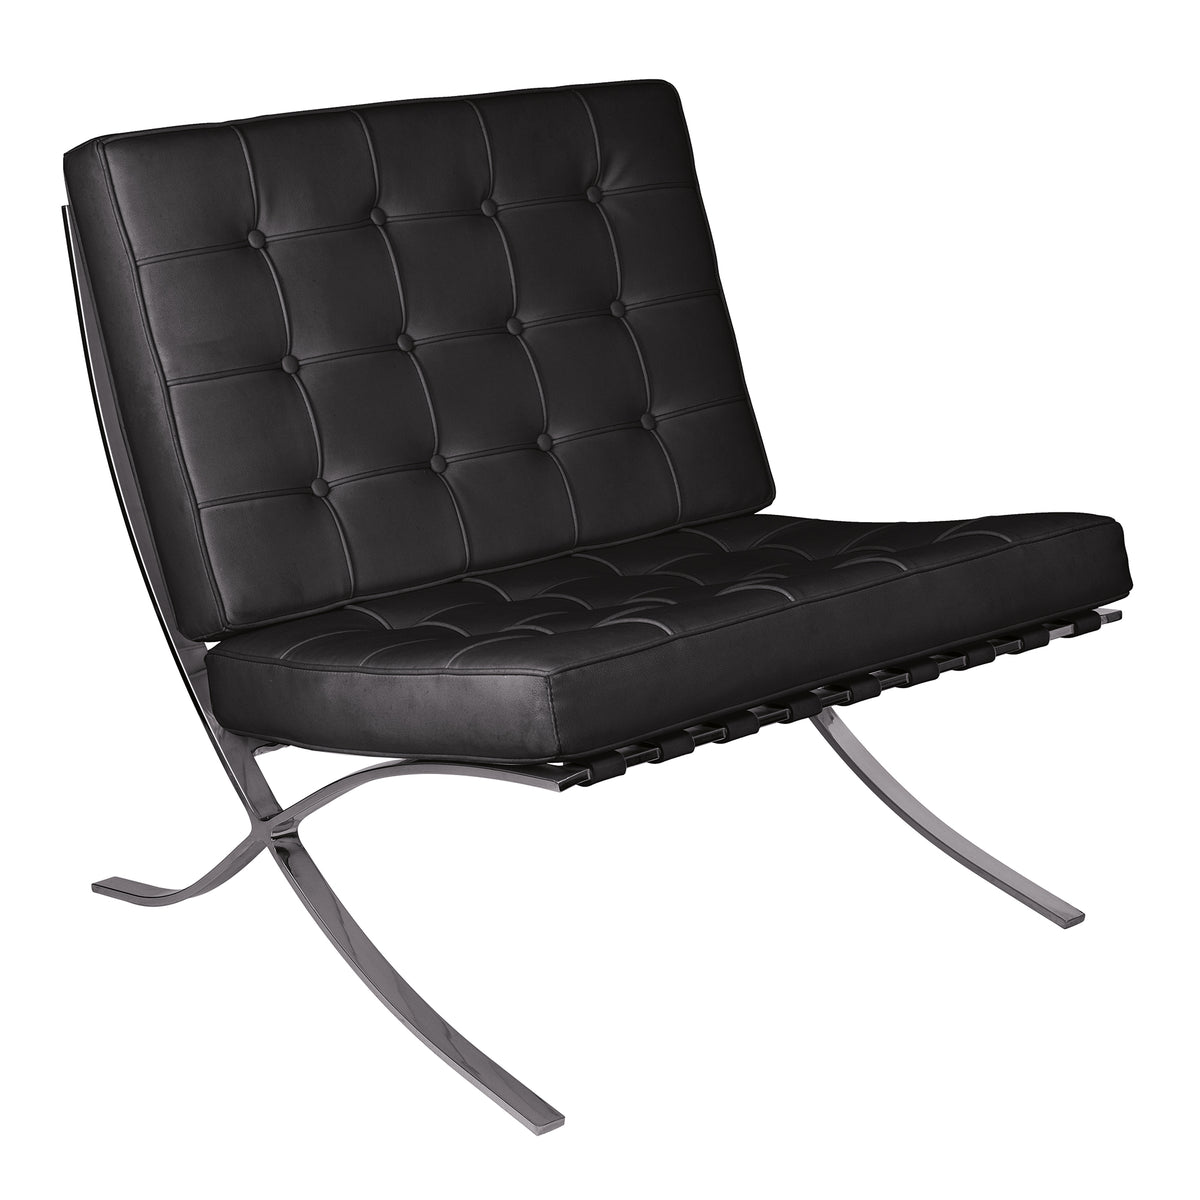 Valencia - Contemporary Oversized Leather Faced Reception Chair with Classic Button Design